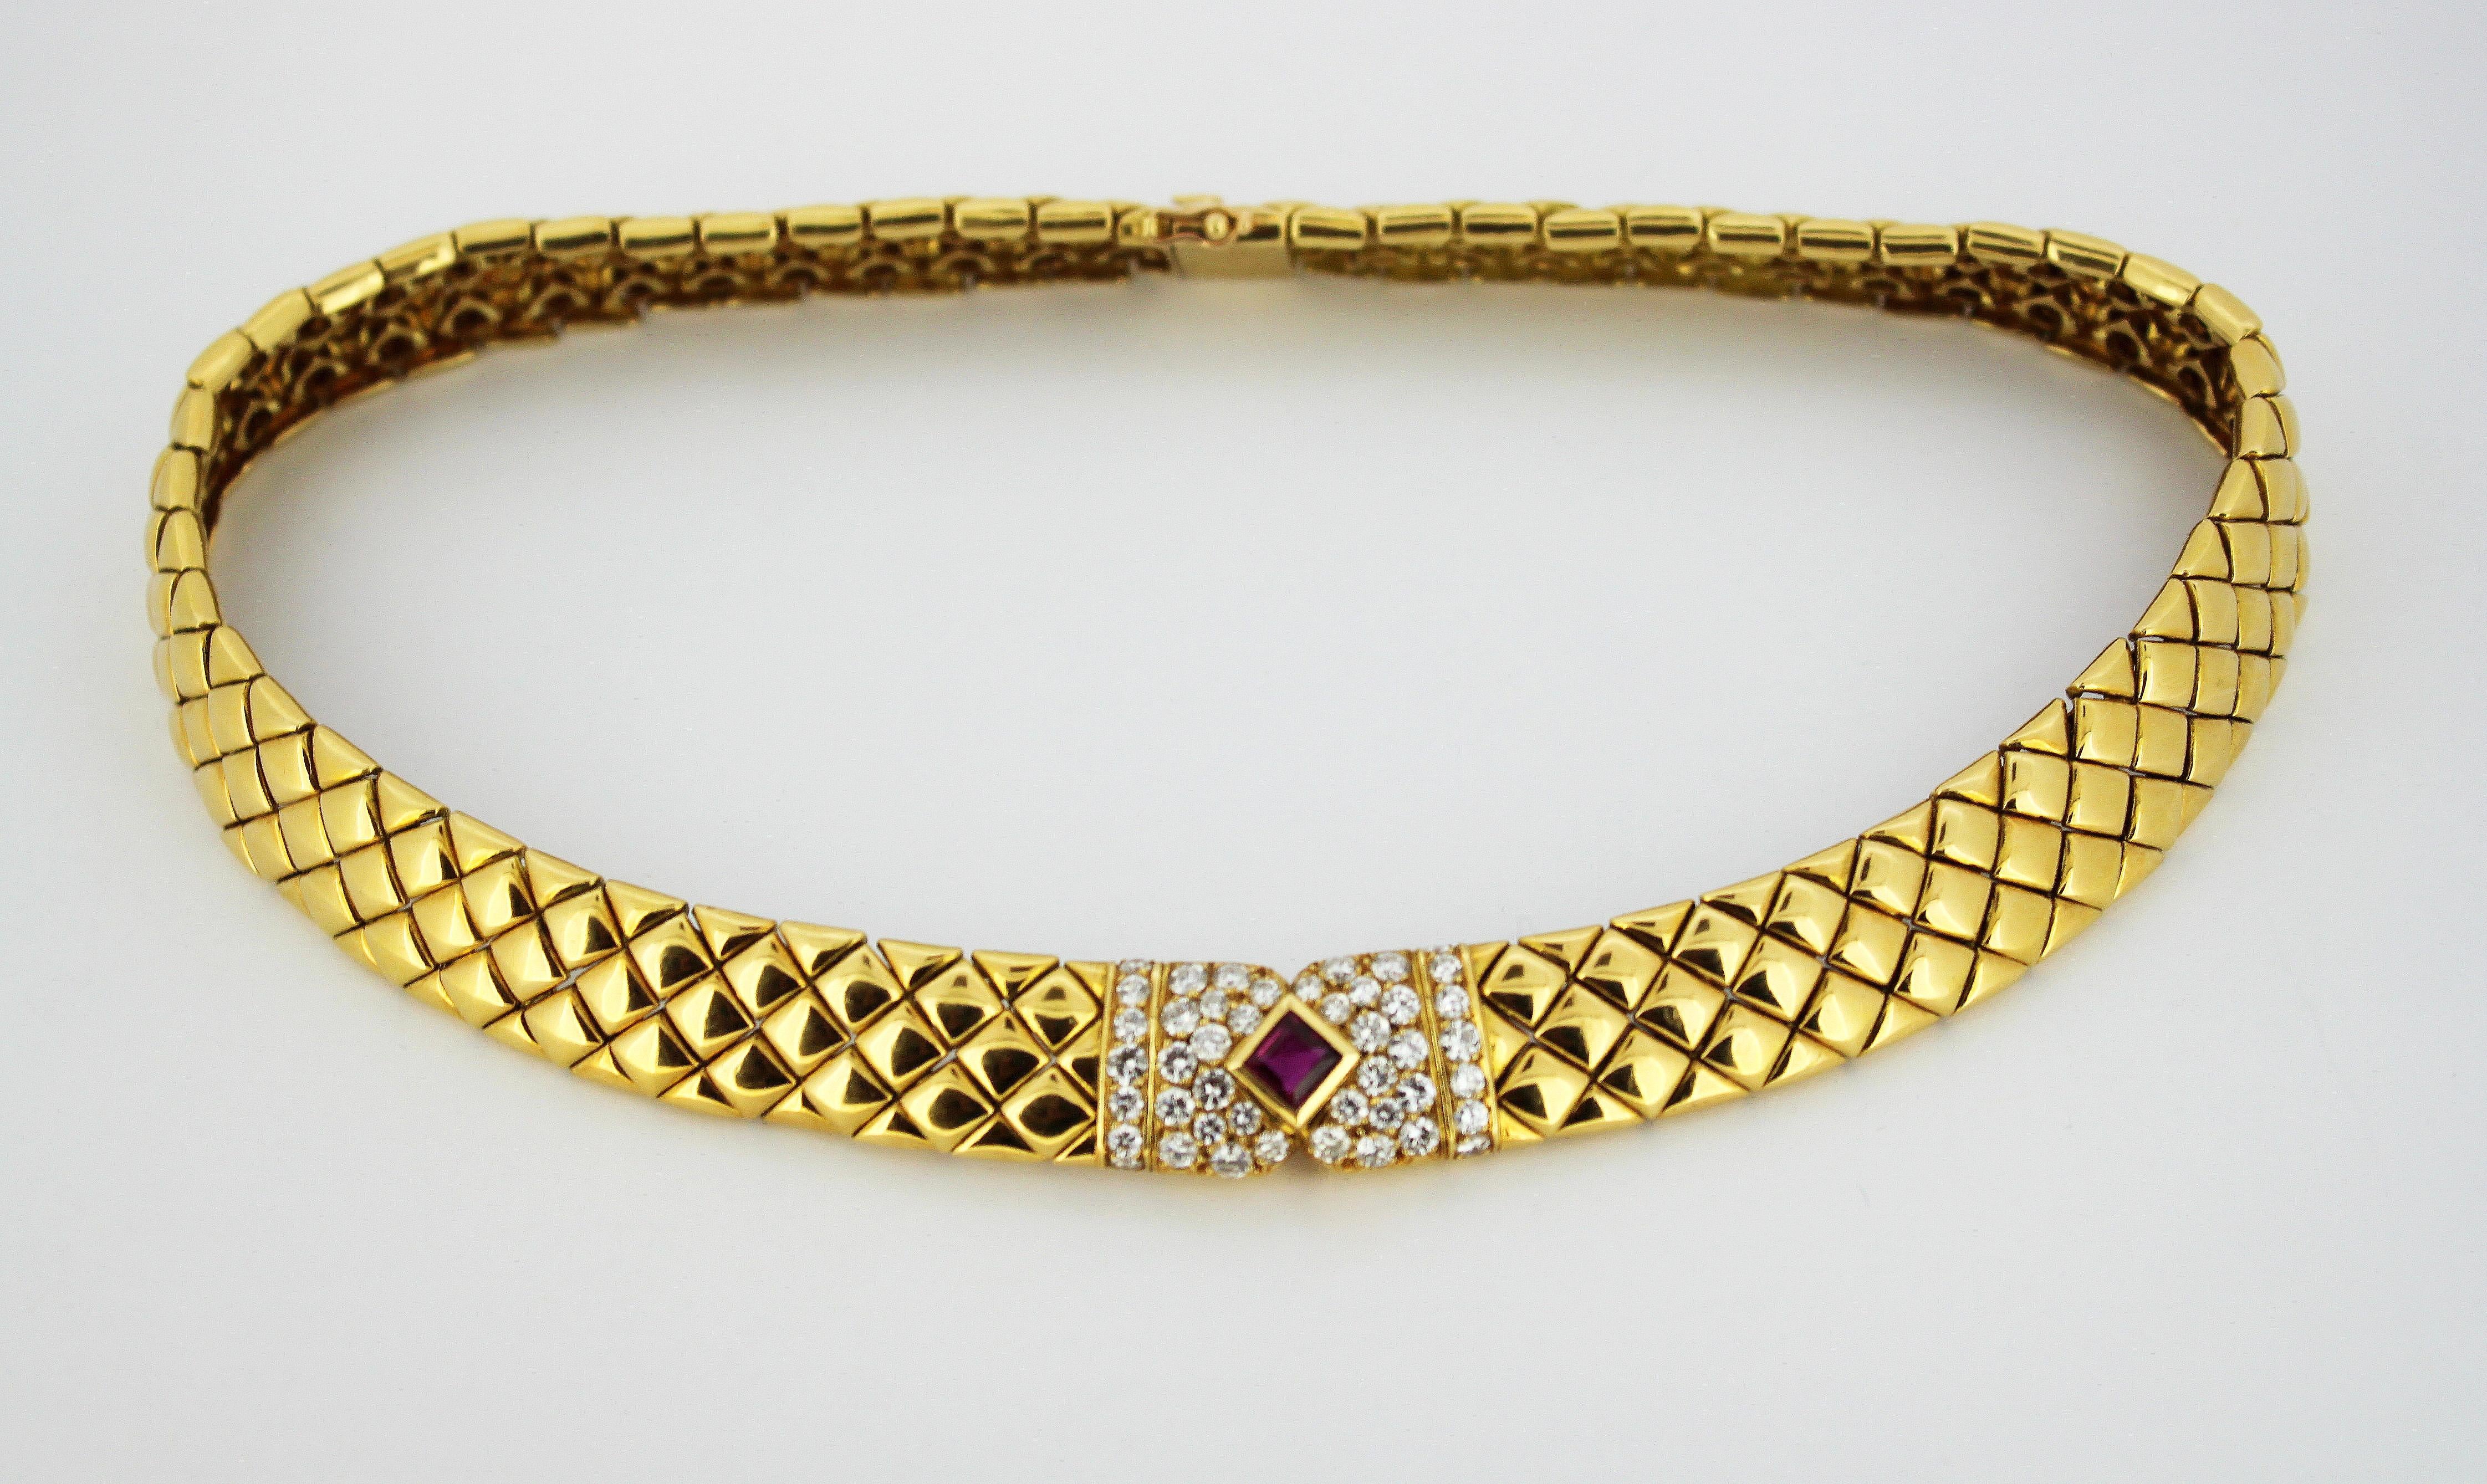 18kt gold choker necklace with ruby and diamonds.
Designer: Van Cleef & Arpels
Made in France Circa 2000's
Fully hallmarked.

Dimension - 
Necklace Length x Width : 37 x 1.4 cm
Weight : 99 grams

Ruby - 
Cut : Square
Size : 0.50 ct
Treatment :